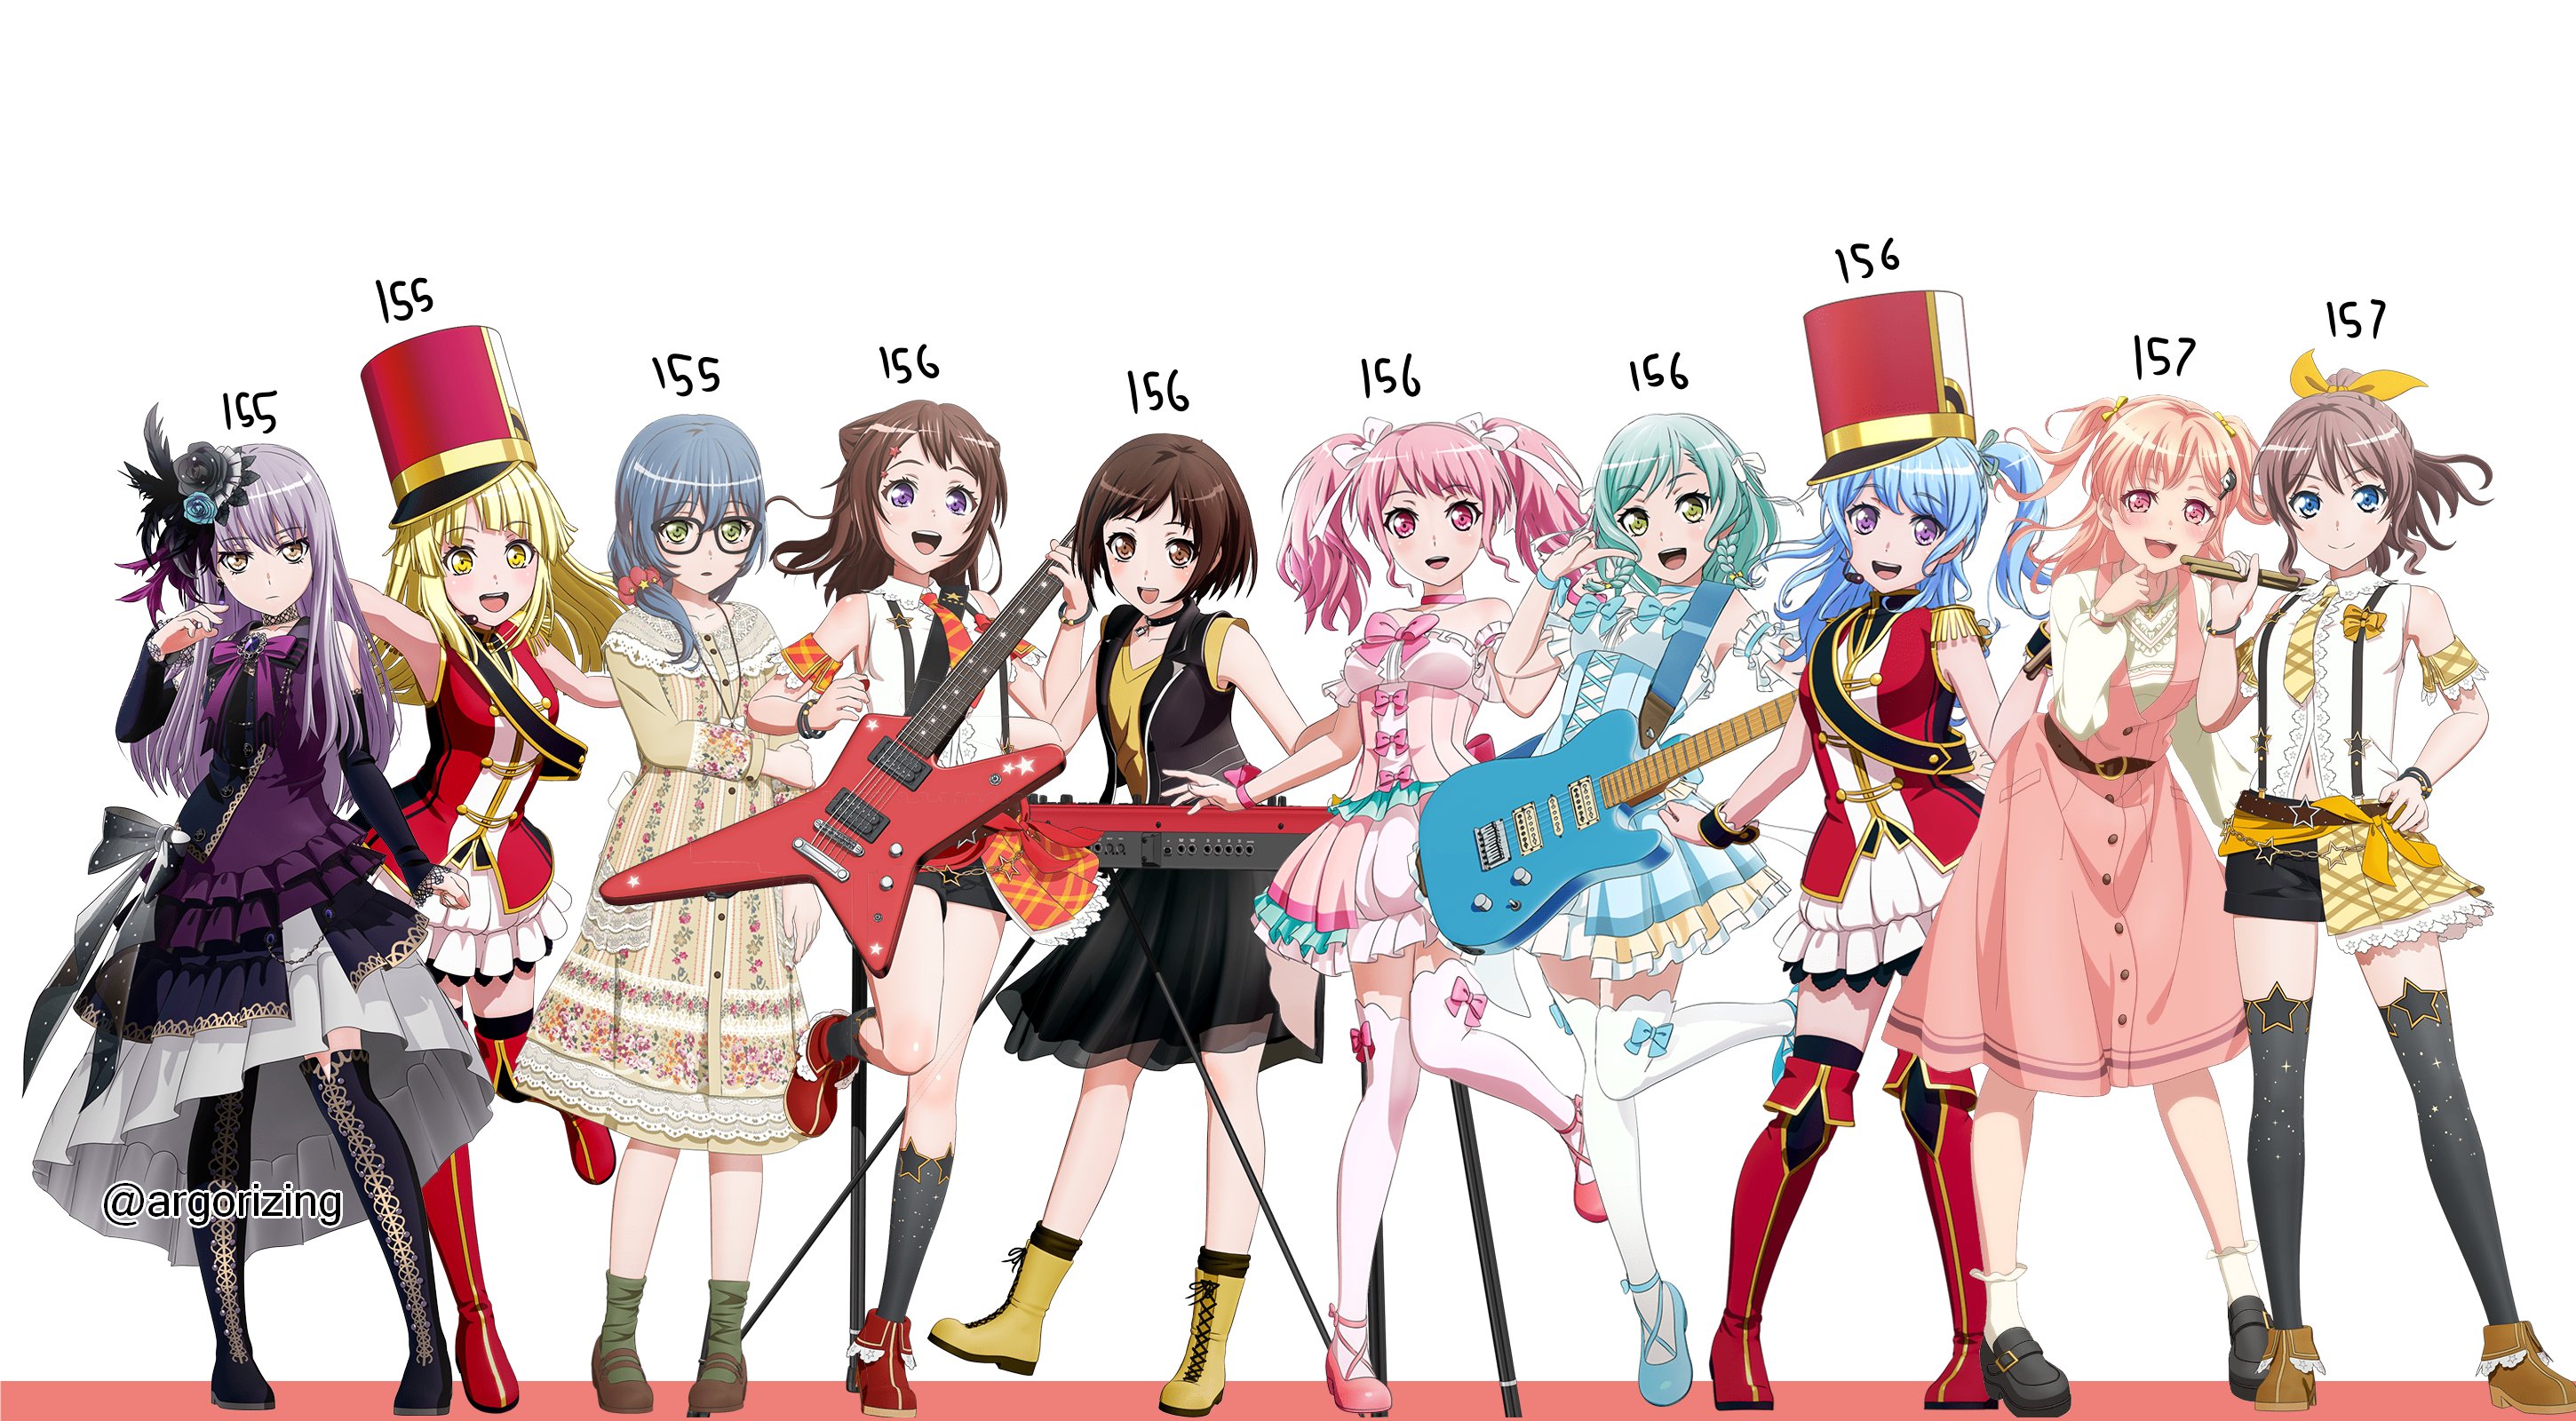 BanG Dream!  Characters Height Comparison 